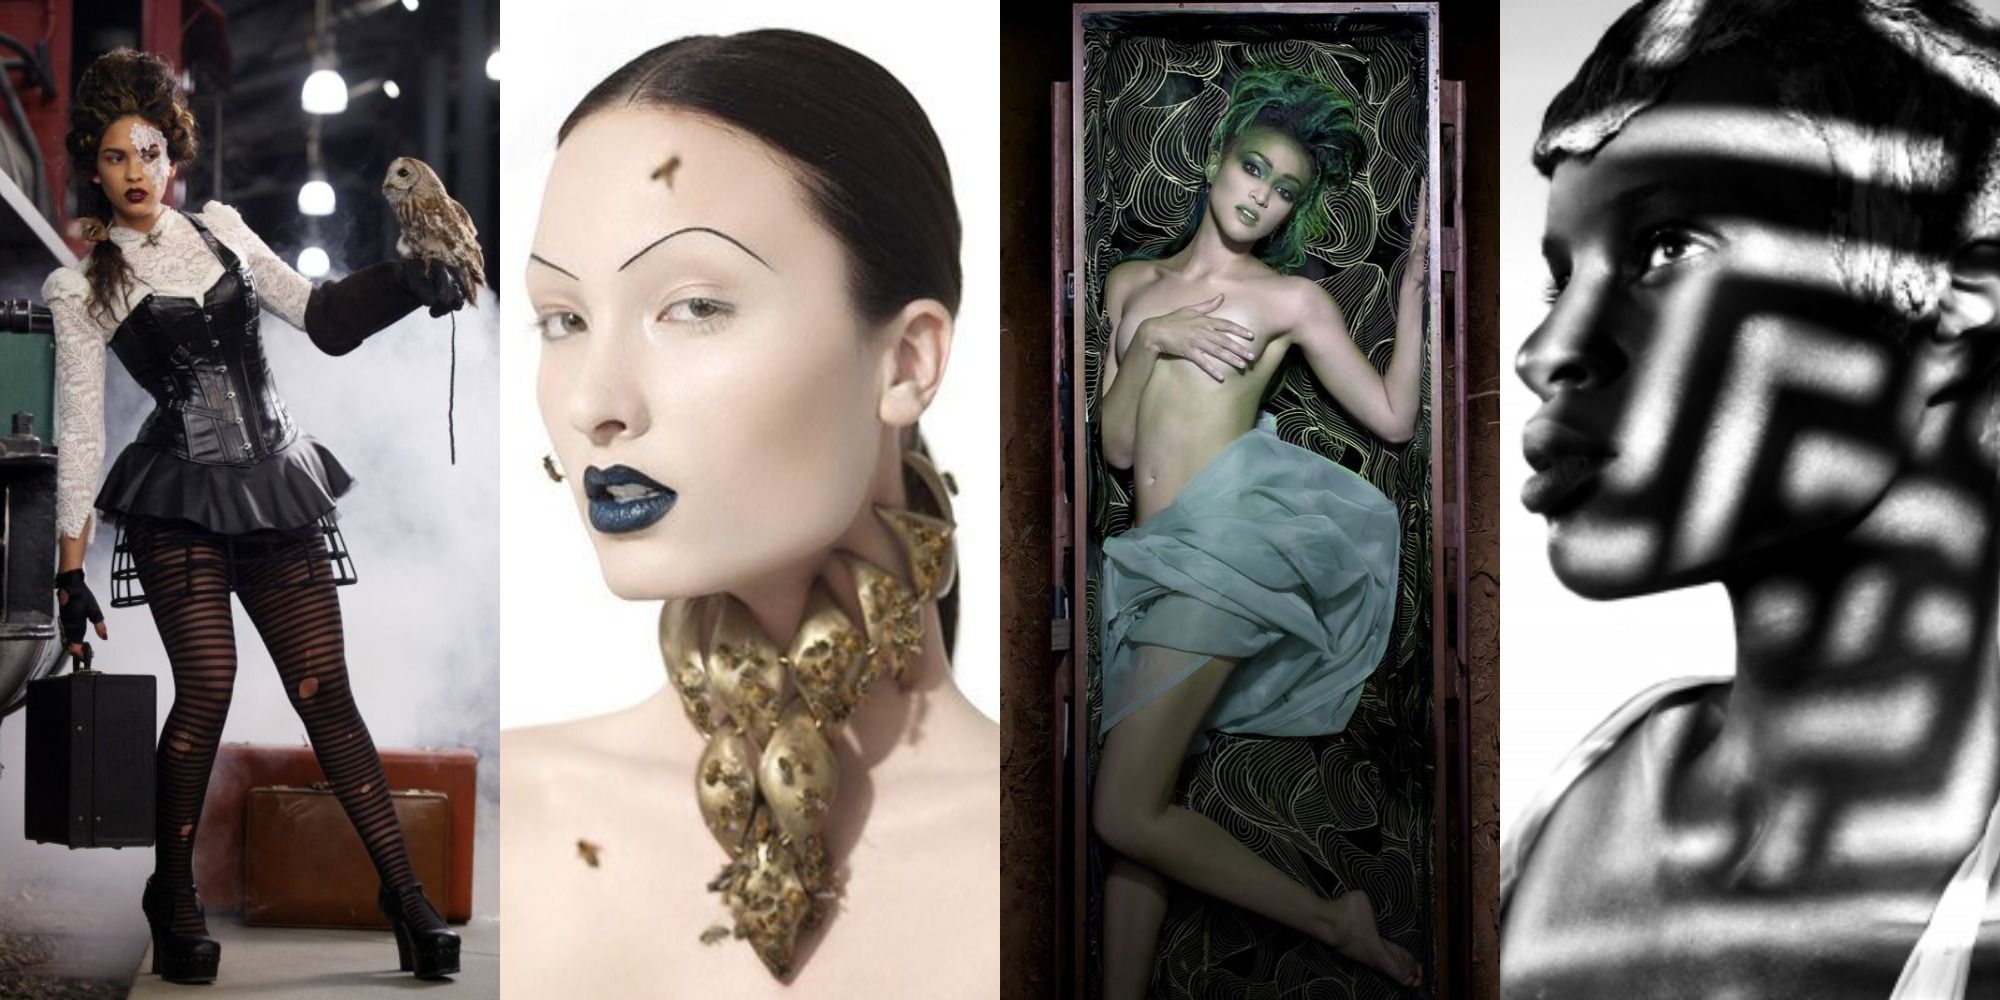 Four side by side images from America's Next Top Model of the best model photoshoots.